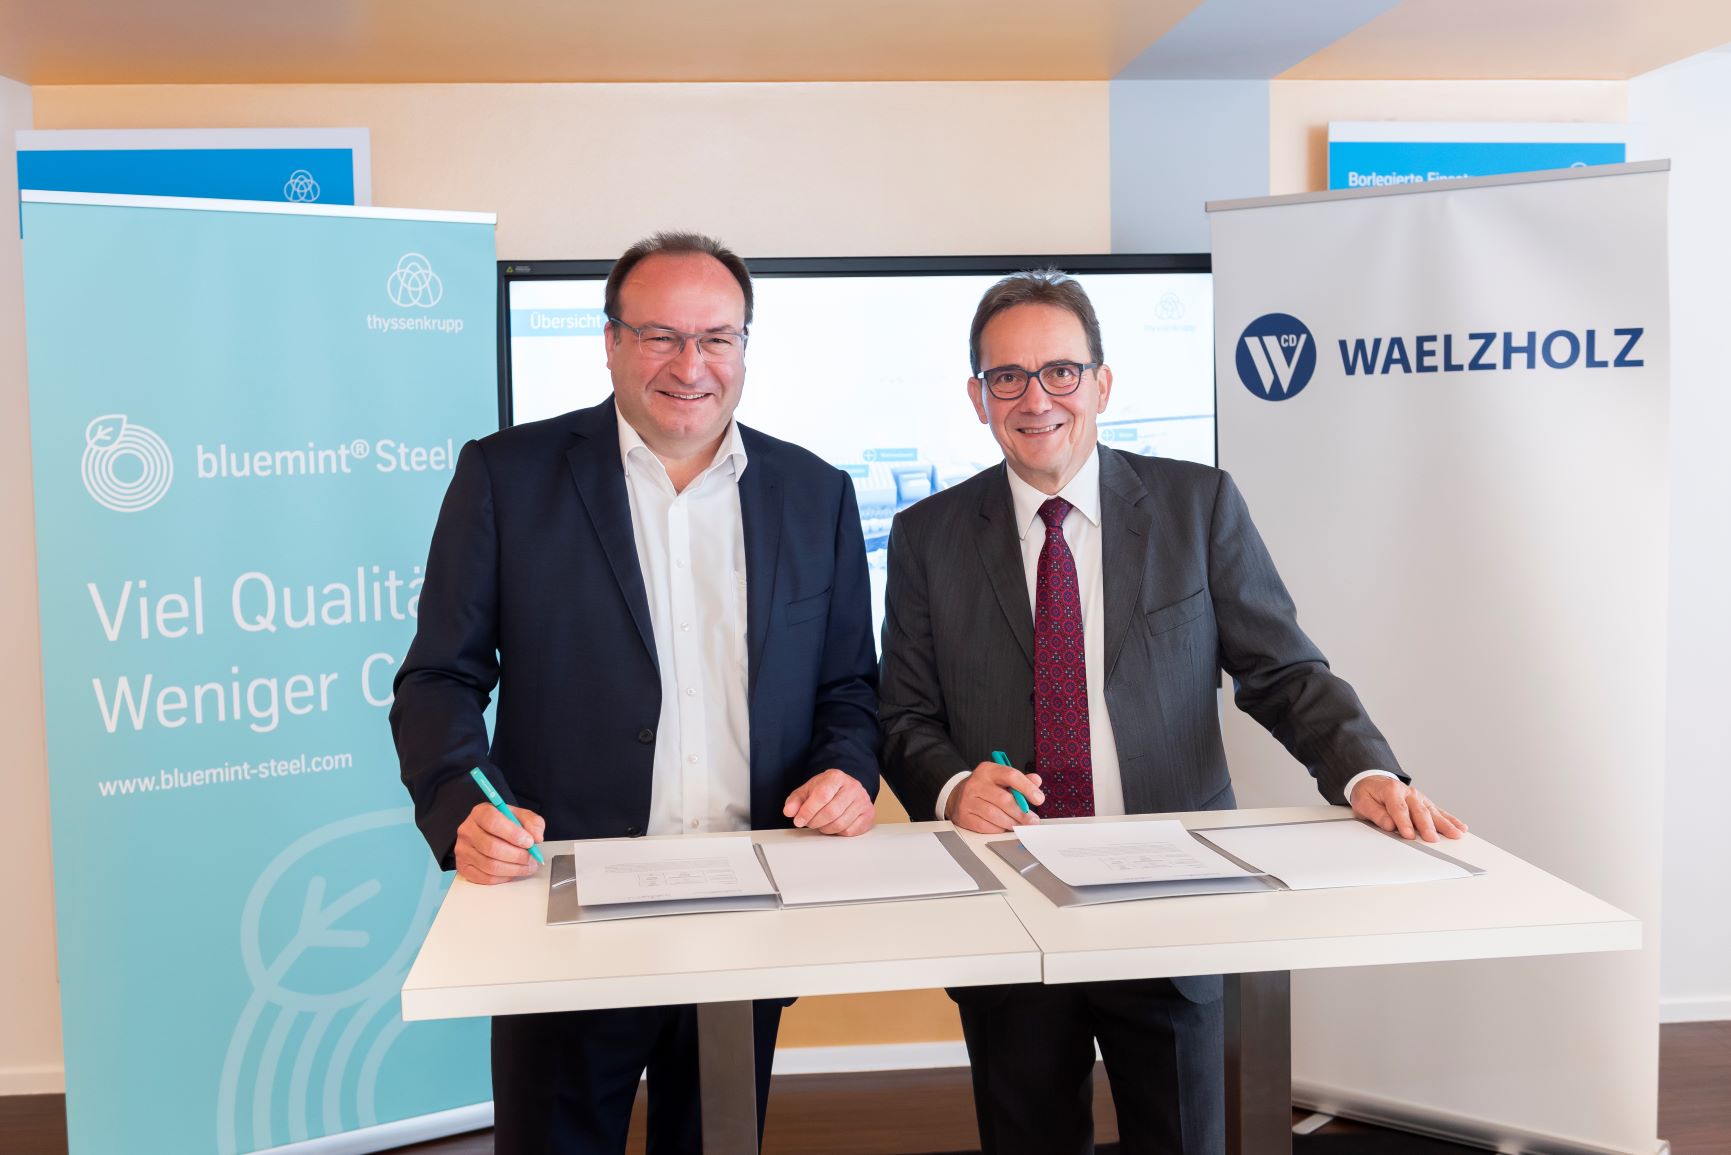 Thyssenkrupp Steel and Waelzholz sign letter of intent (from left to right): André Matusczyk (Chairman of the Executive Board, Thyssenkrupp Hohenlimburg), Dr. Matthias Gierse (Managing Director Sales and Purchasing, C.D. Waelzholz) © Thyssenkrupp